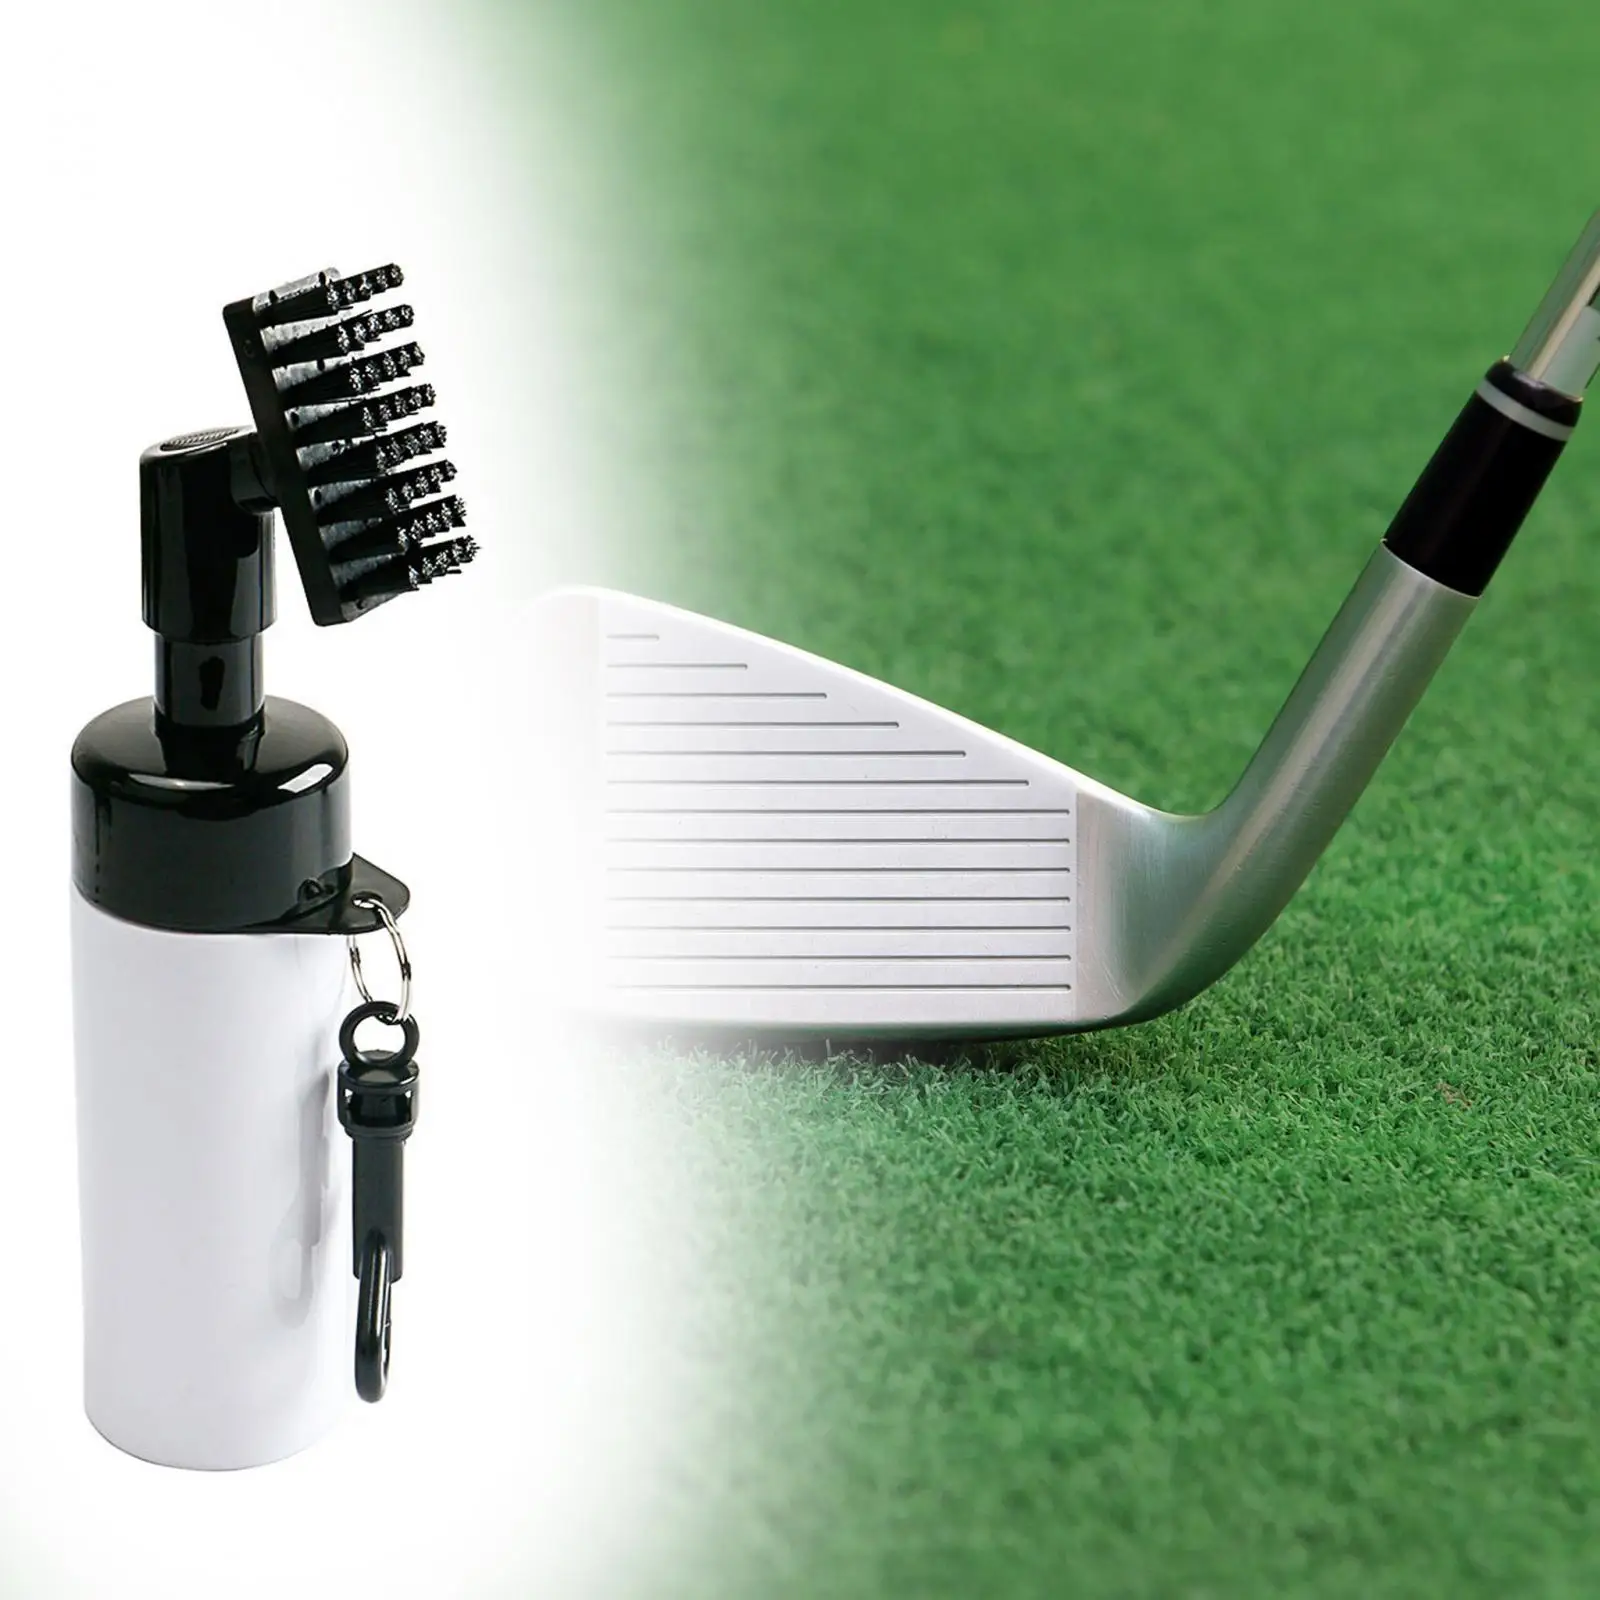 Golf Club Cleaner Brush with Water Bottle Gift Golf Accessories Golf Club Groove Cleaner for Golfer Cleaning Dirty Clubs Groove